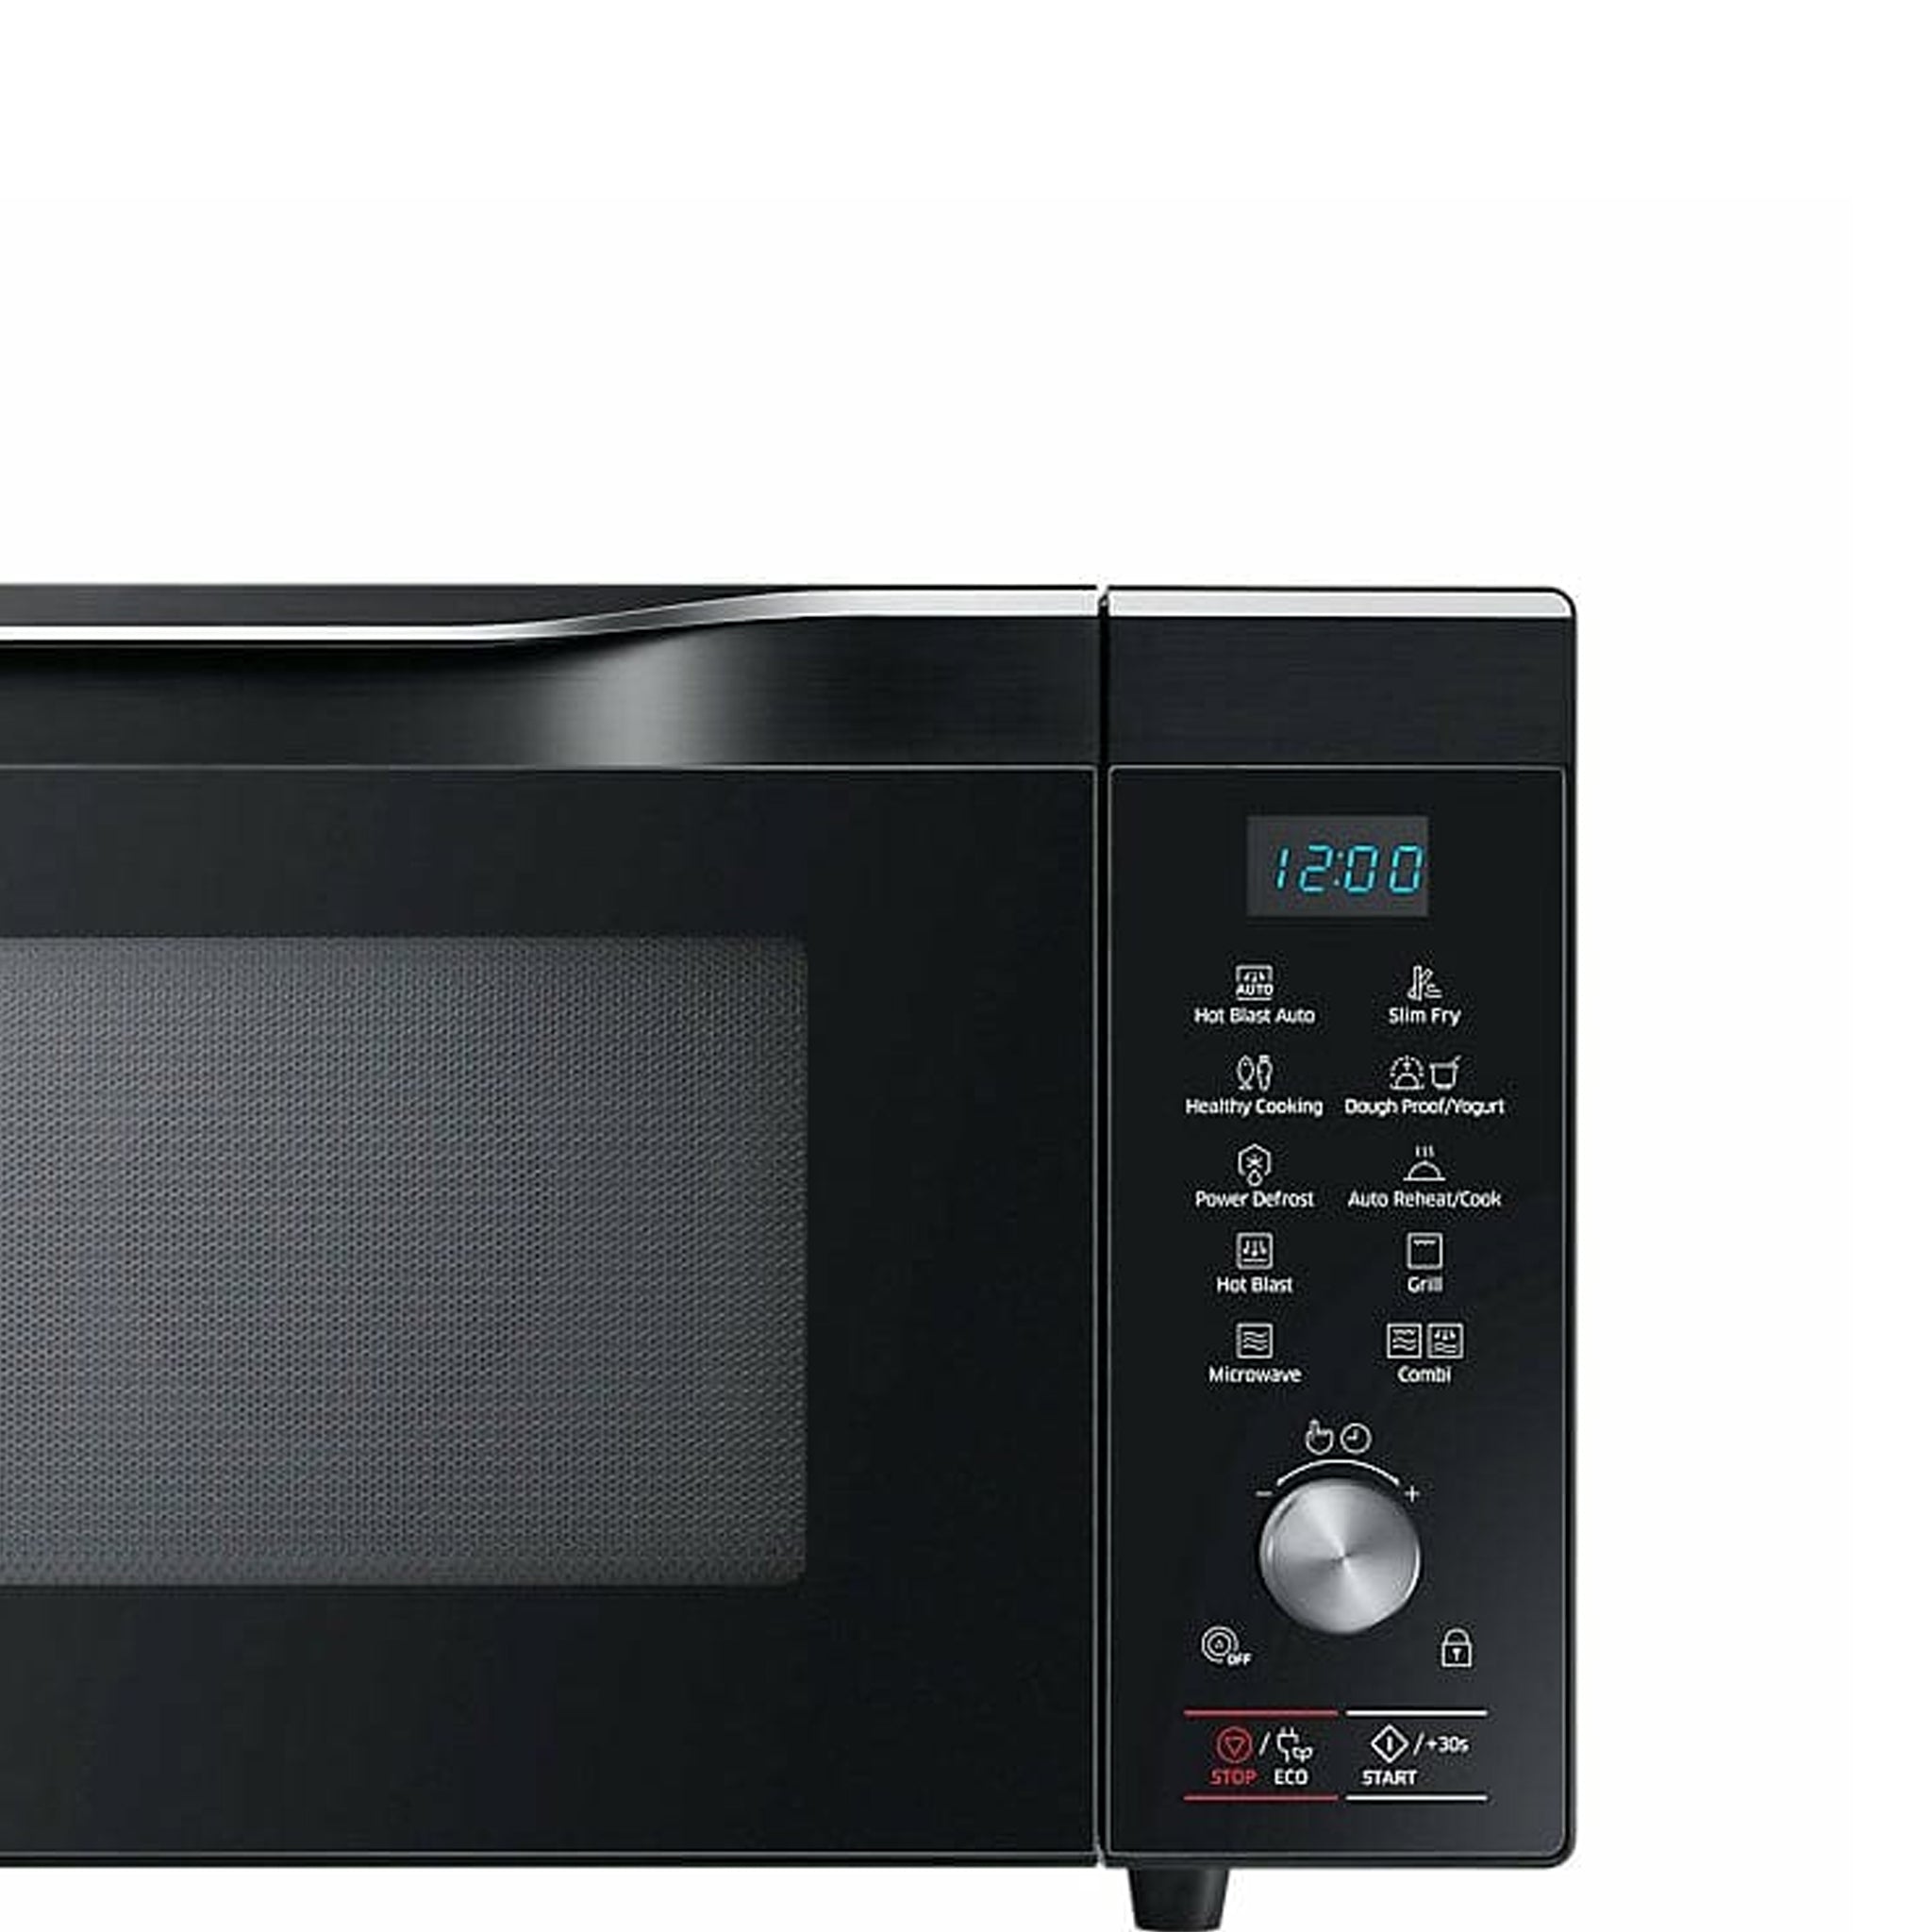 SAMSUNG 32L MC32K7055KT Smart Oven with Hot Blast Function Microwave Oven Samsung